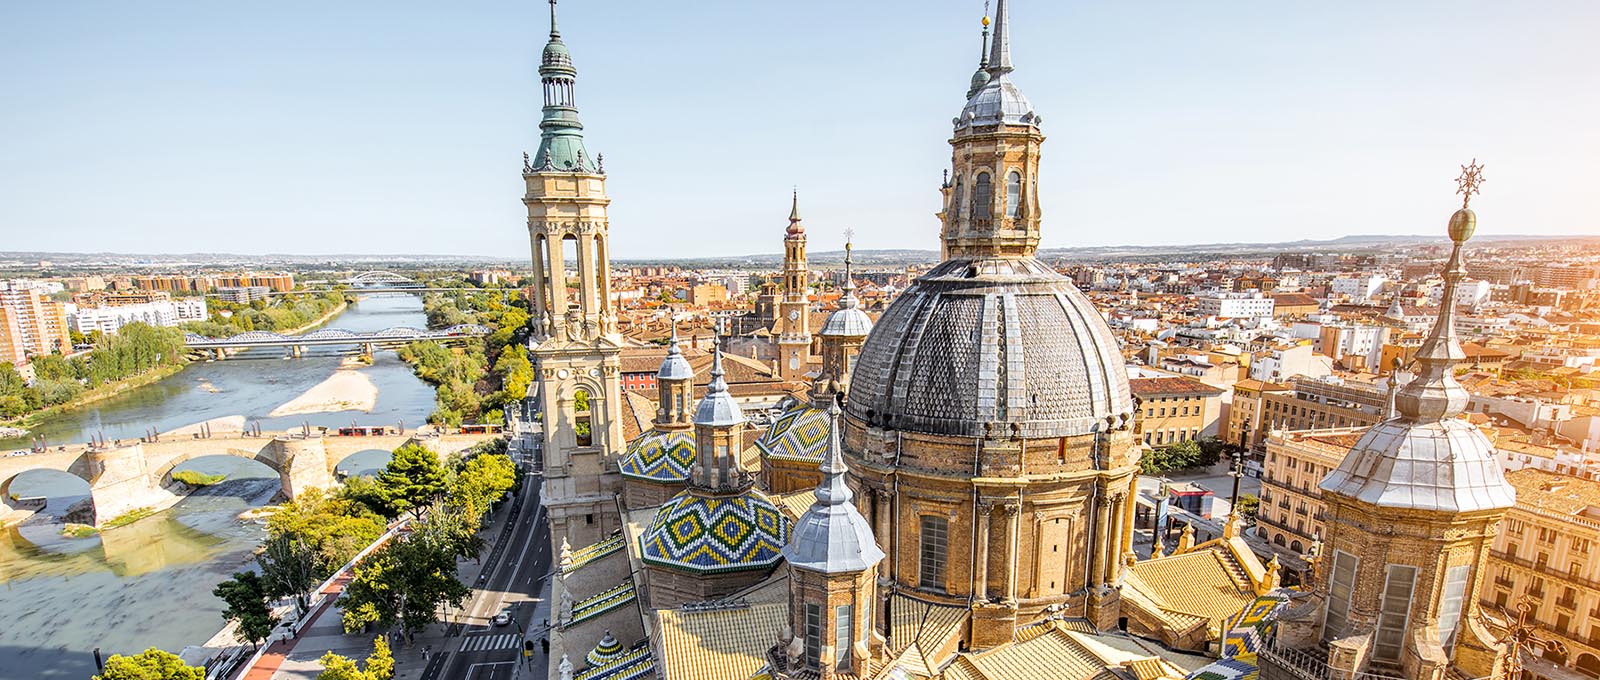 Aerial of cathedral in Spain